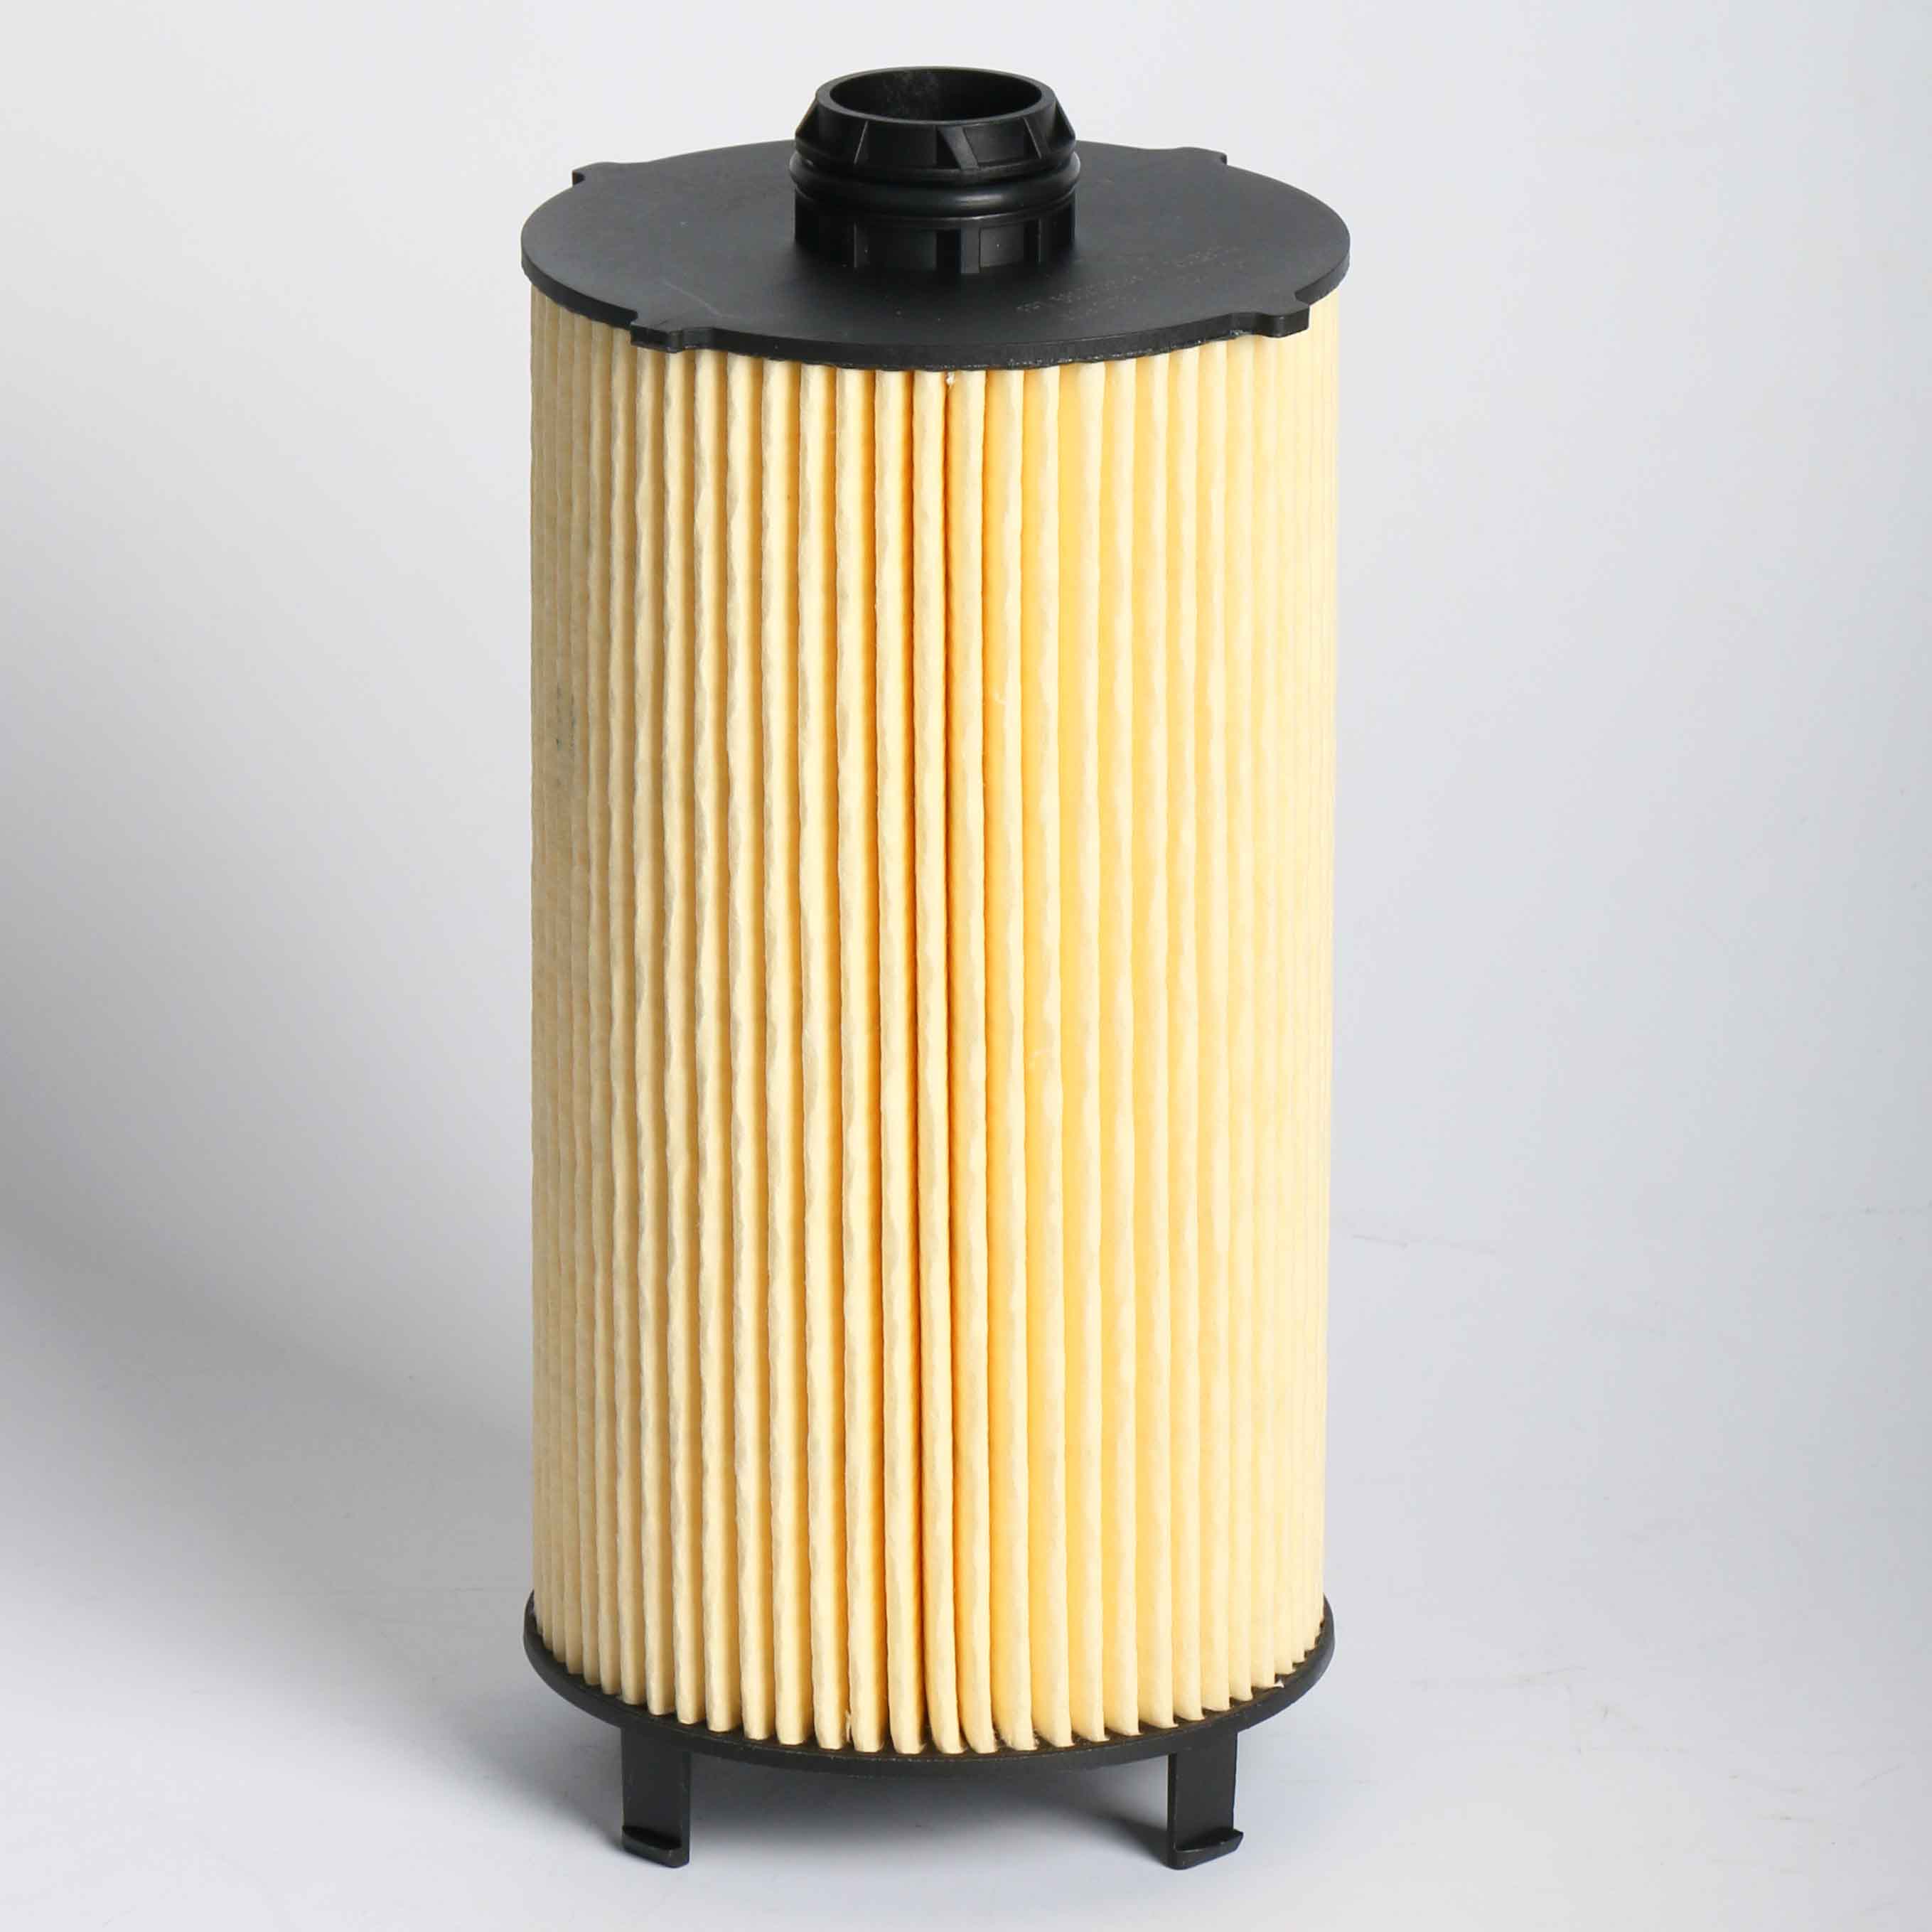 5802108699 IVECO OIL FILTER ELEMENT 